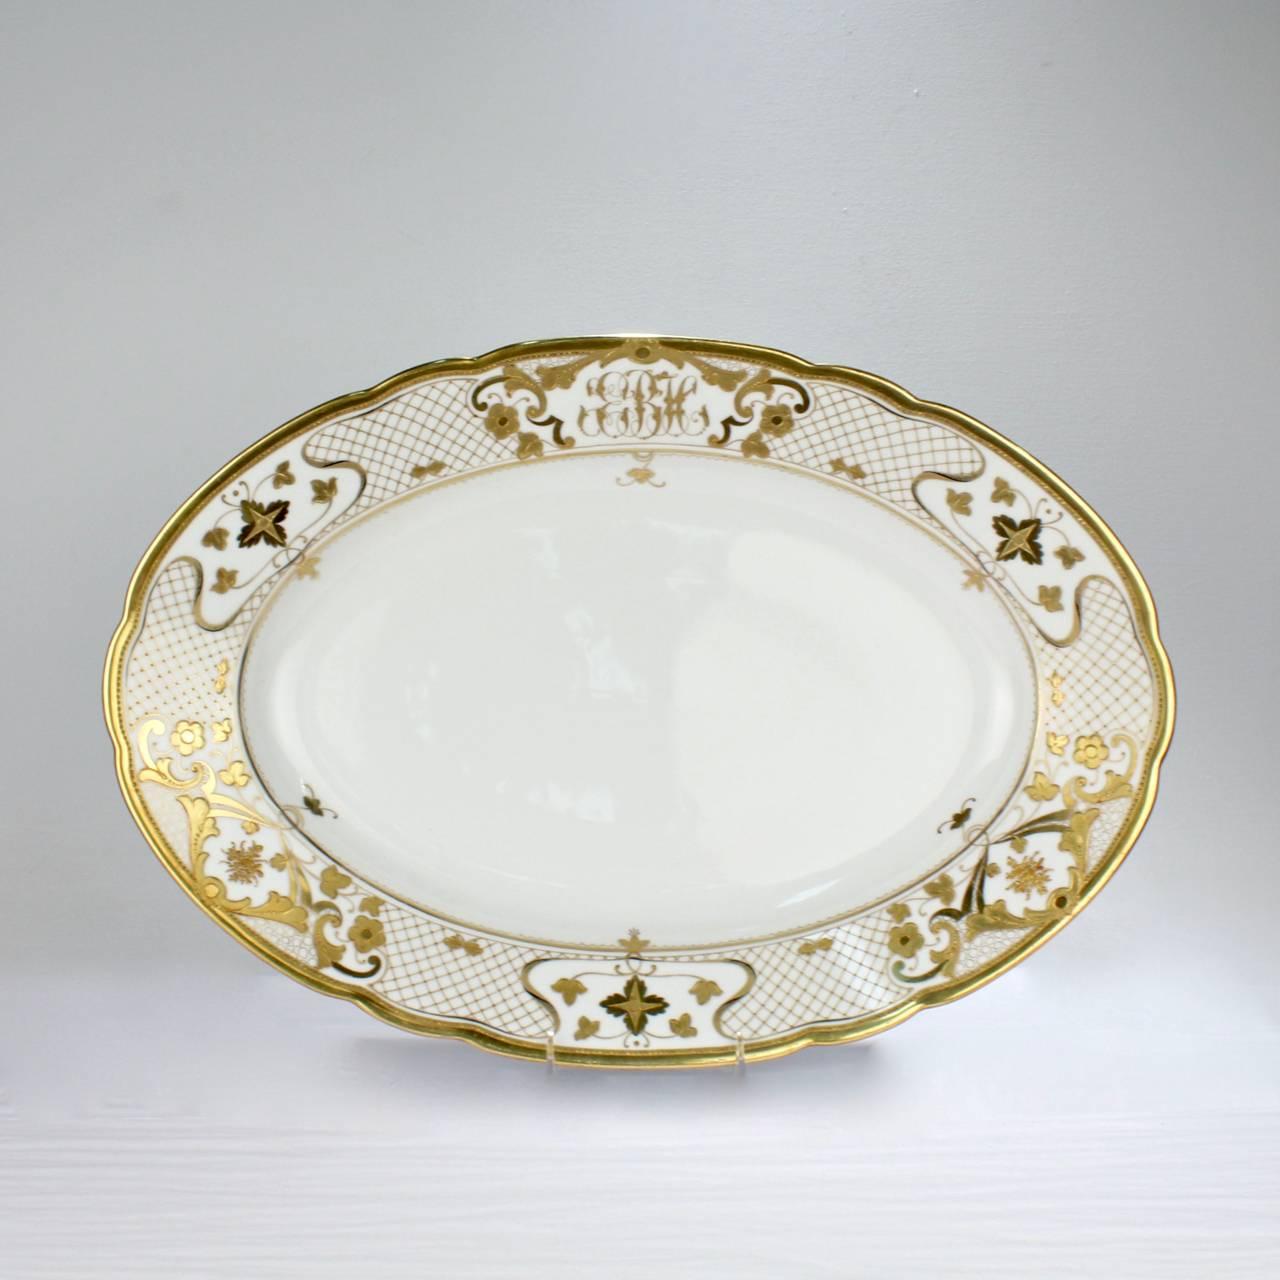 A fine and large antique Dresden porcelain serving platter by Ambrosius Lamm.

With raised, jeweled, and two-tone gilding throughout. Bears a wonderful monogram to the top of the platter. 

Reverse bears a blue Lamm factory mark and impressed